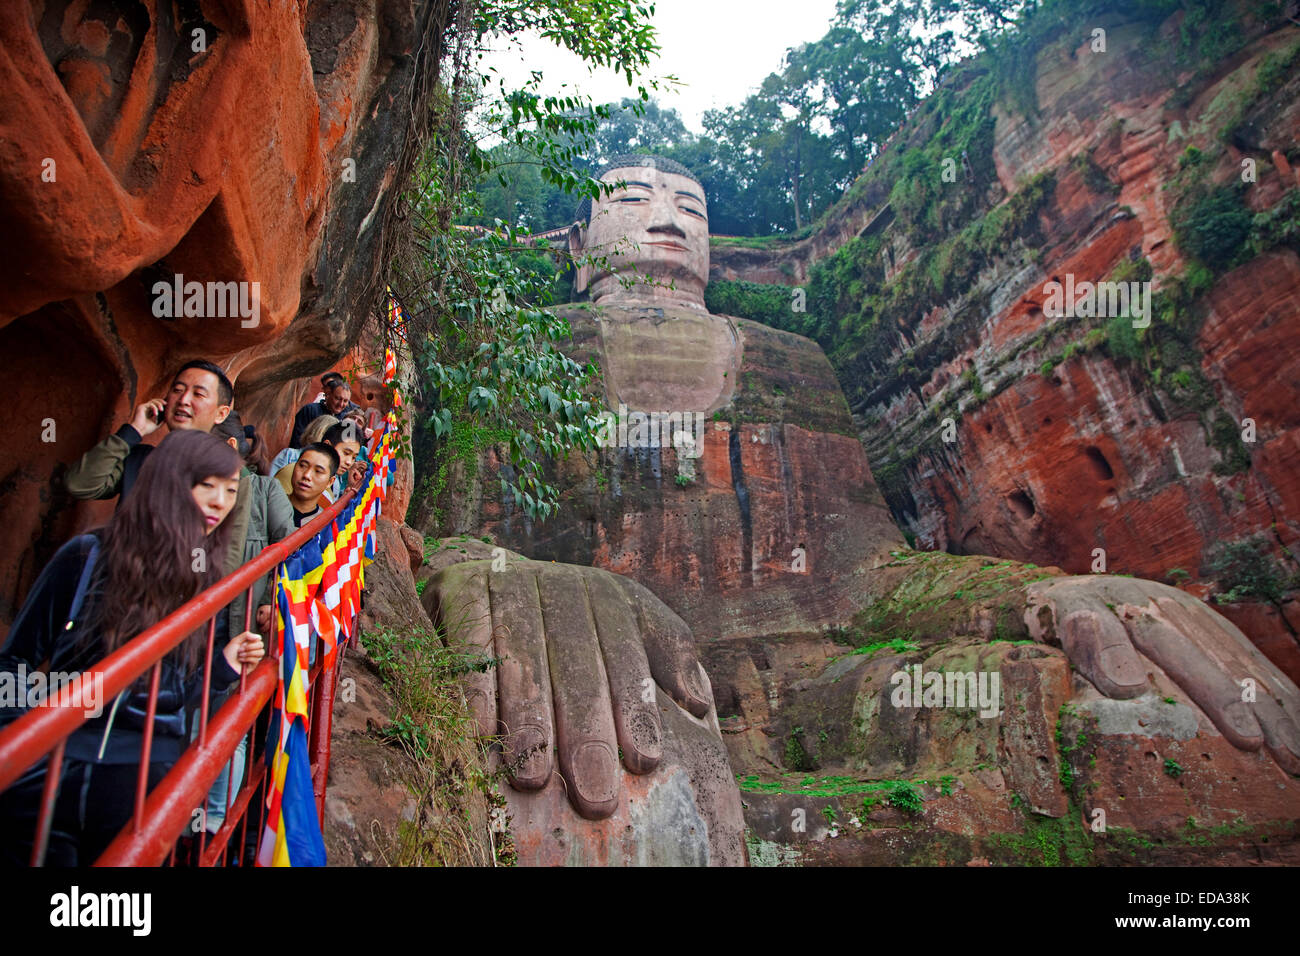 Queue of Chinese tourists walking down the stairs to see the Leshan Giant Buddha, stone-carved statue in Sichuan province, China Stock Photo